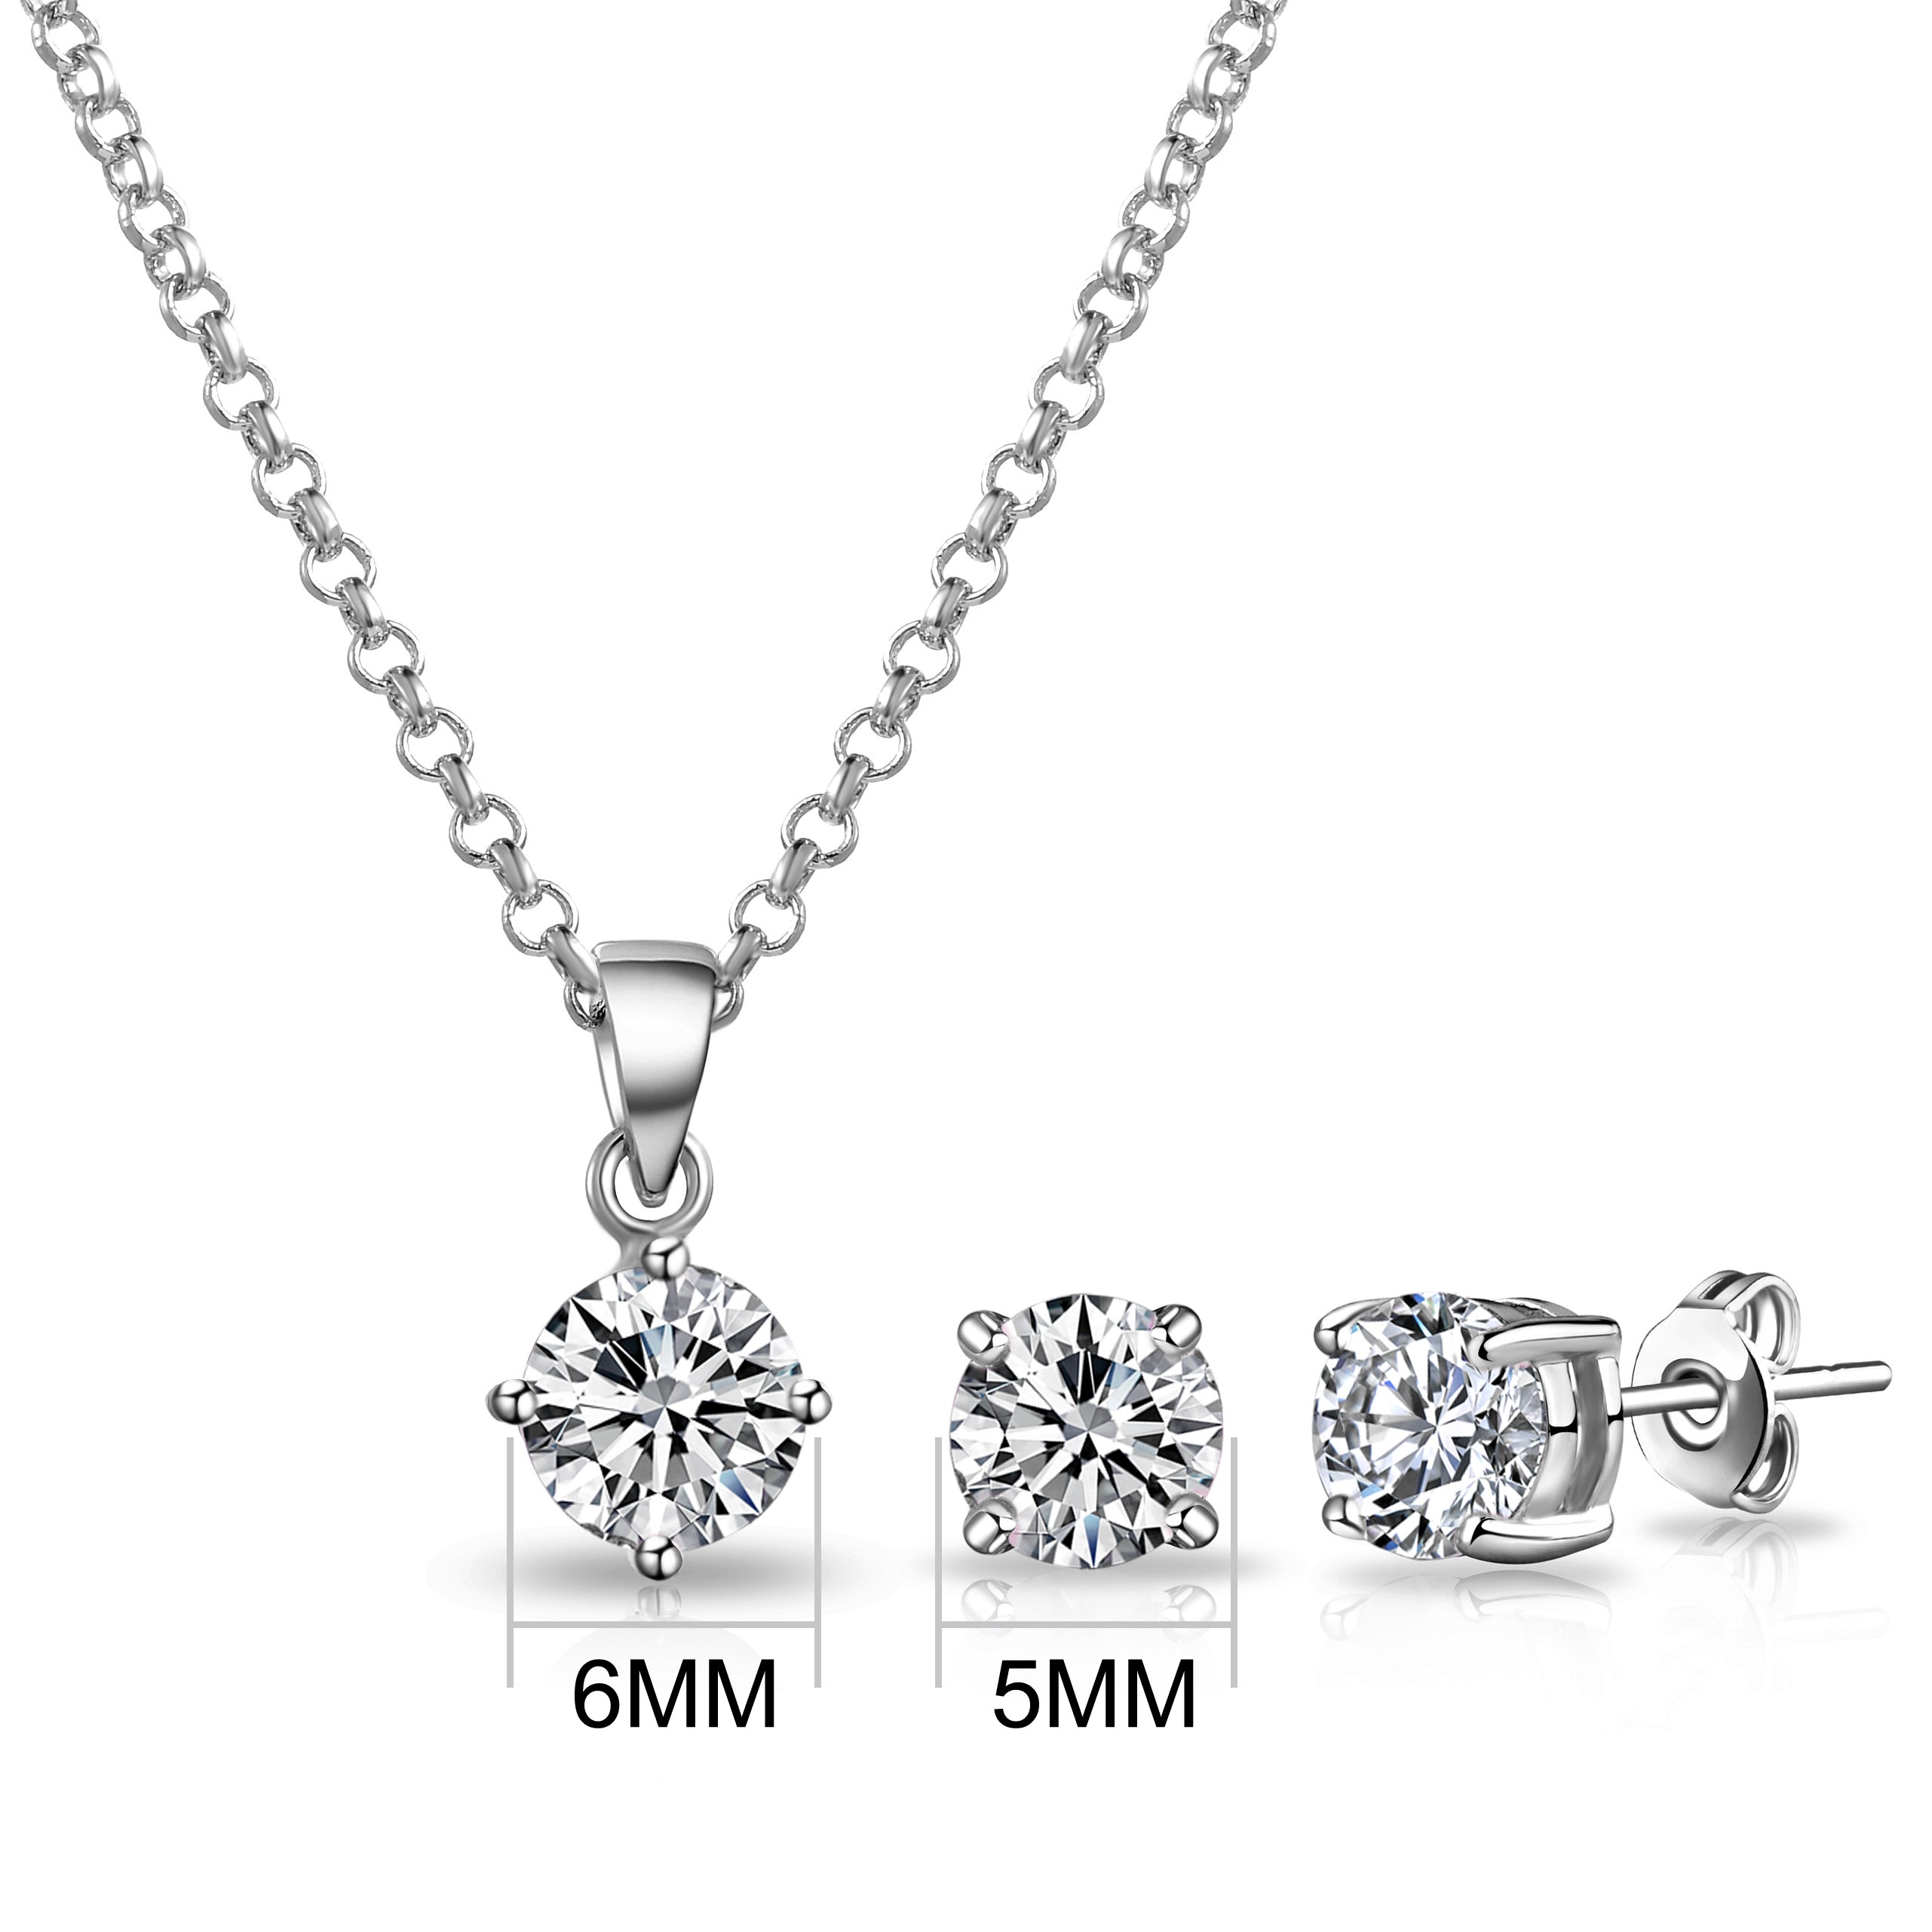 Silver Plated Solitaire Friendship Set Created with Zircondia® Crystals